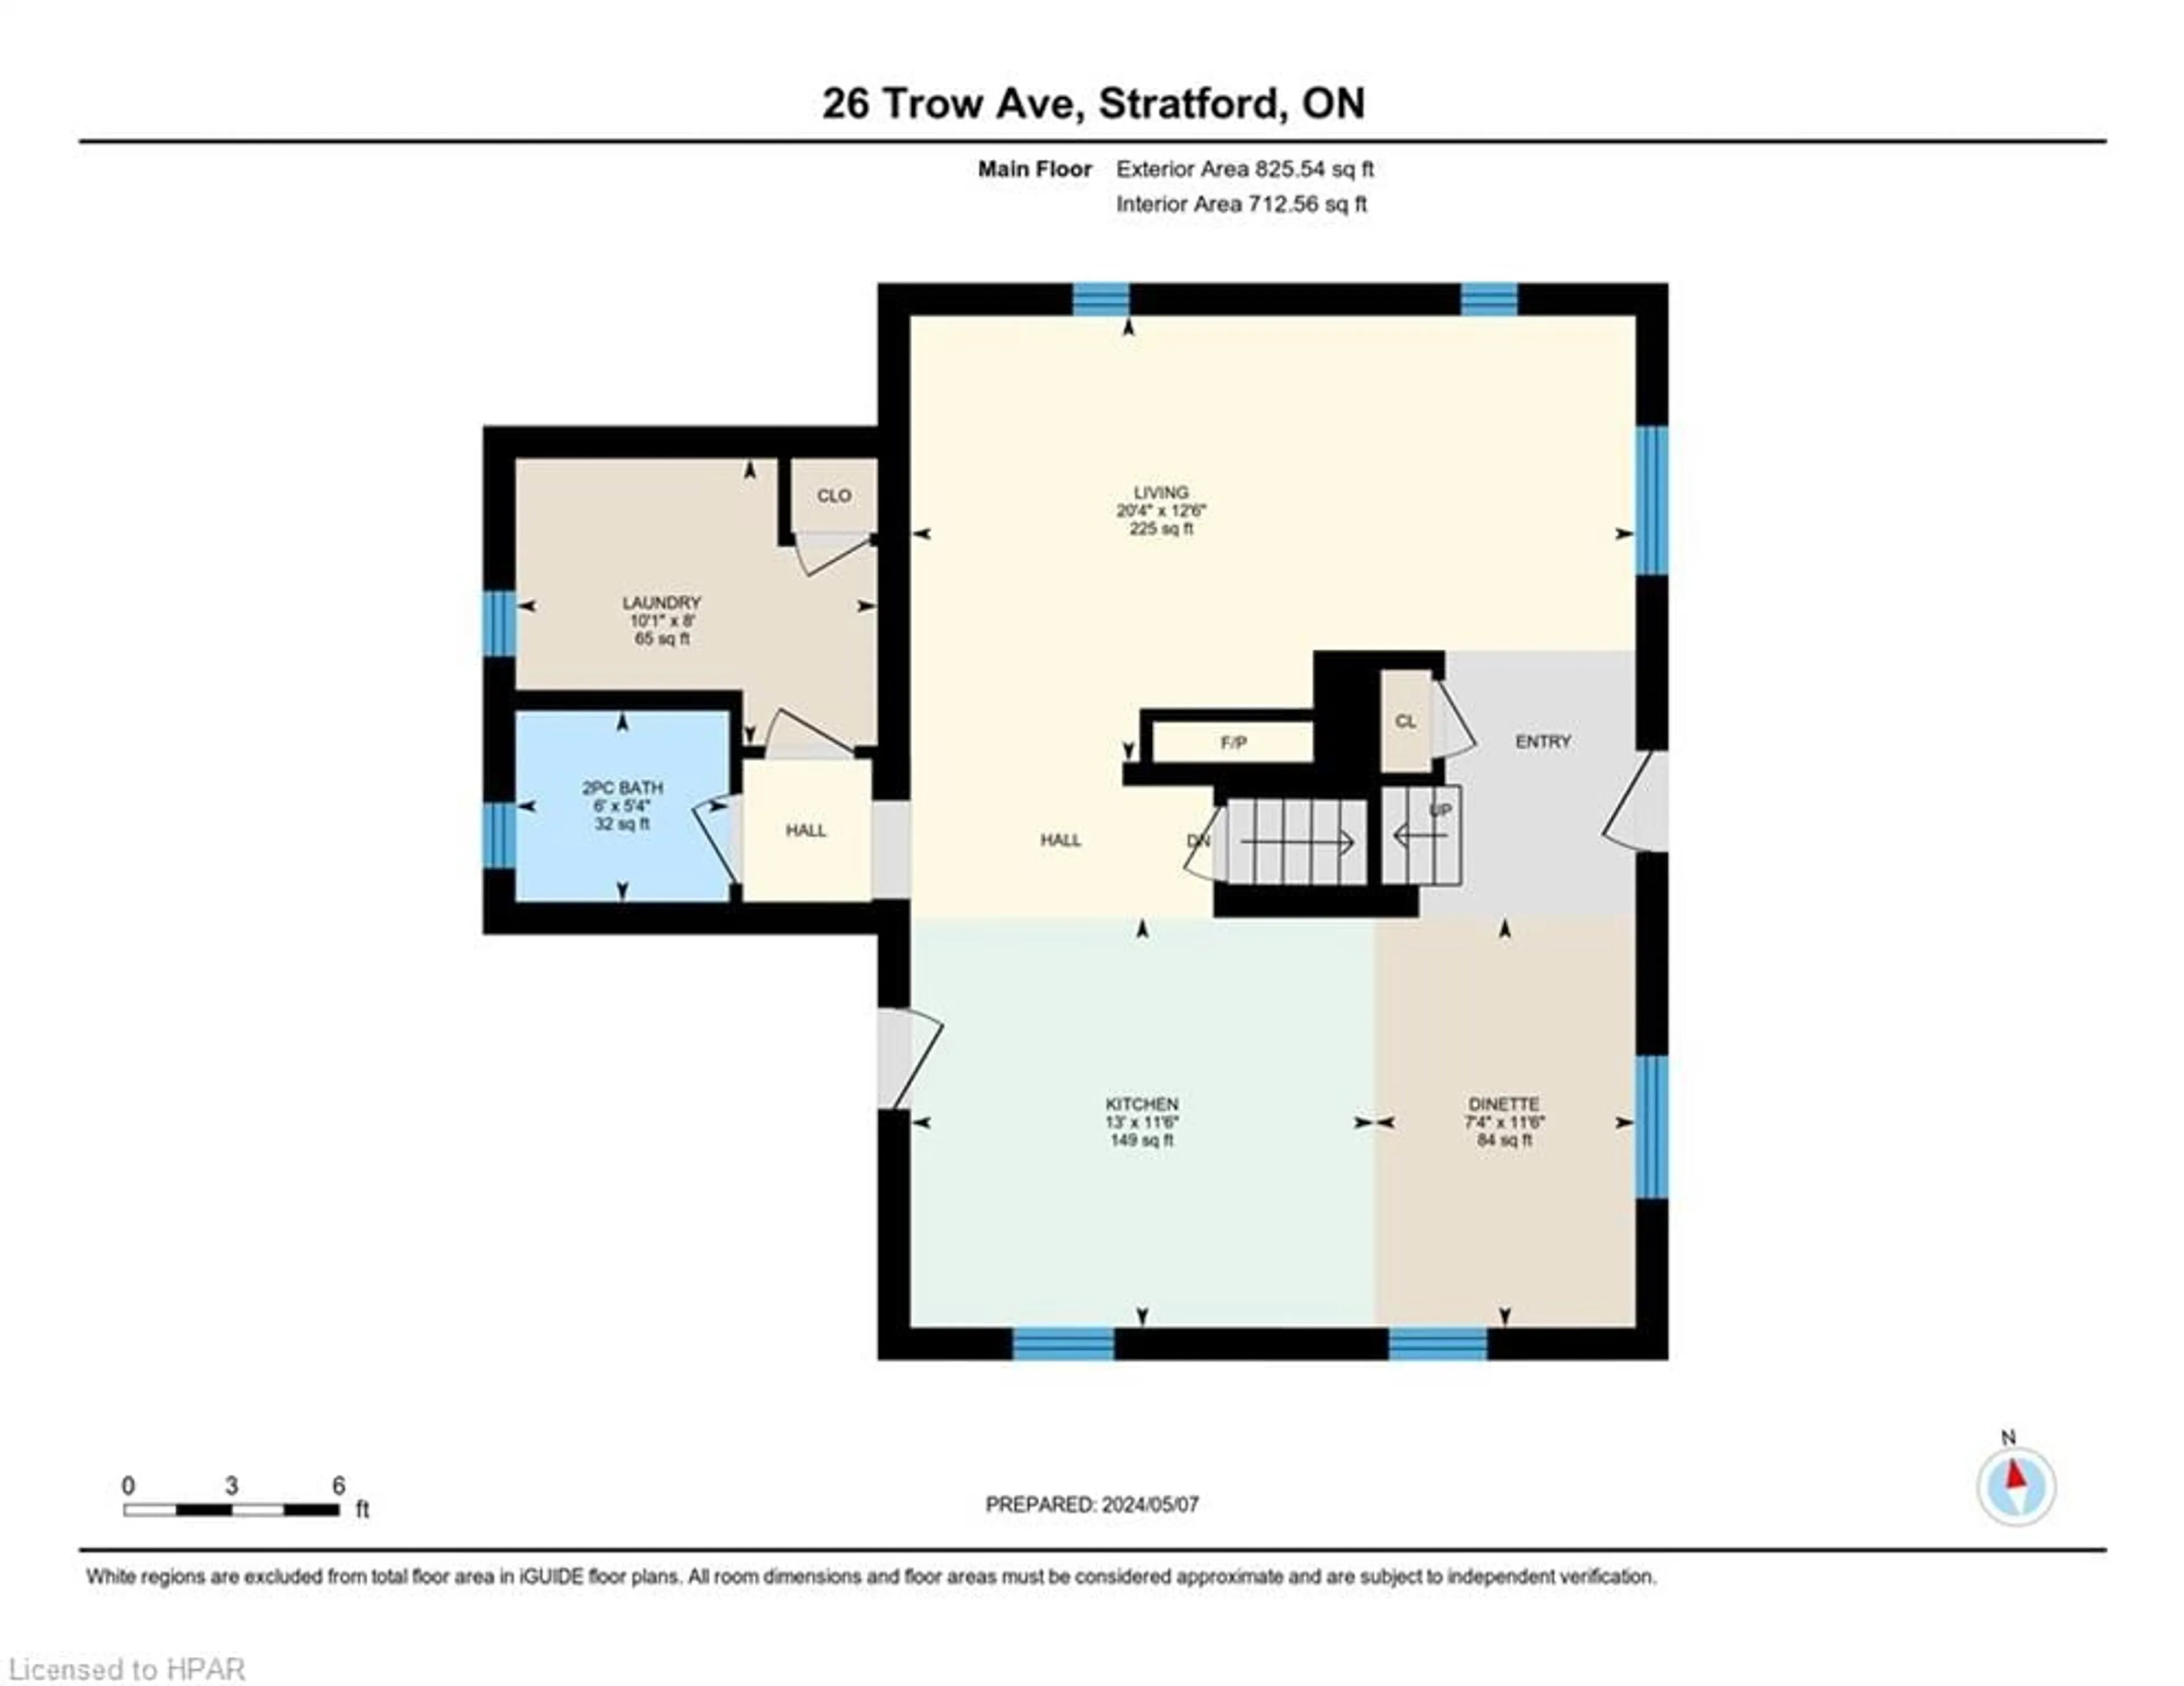 Floor plan for 26 Trow Ave, Stratford Ontario N5A 4L6